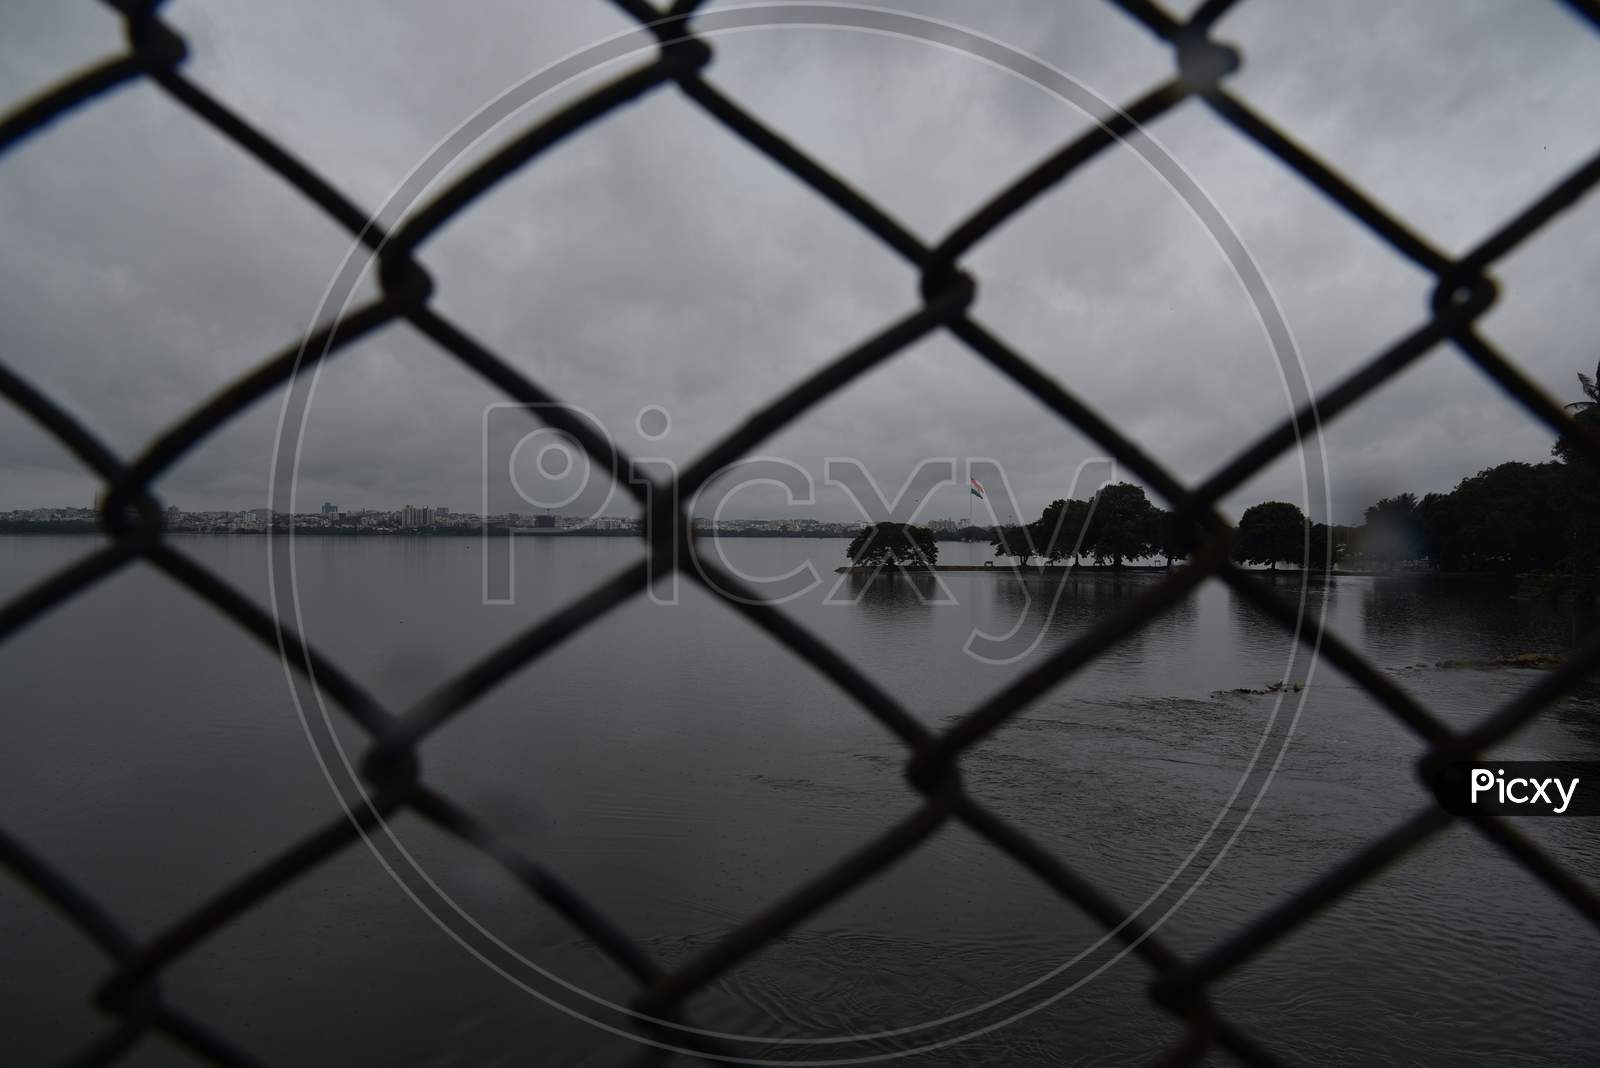 Due to incessant rains from the past one week in Hyderabad, Hussain Sagar lake reaches to its full capacity, 514metres, Tank Bund, Hyderabad, August 16, 2020